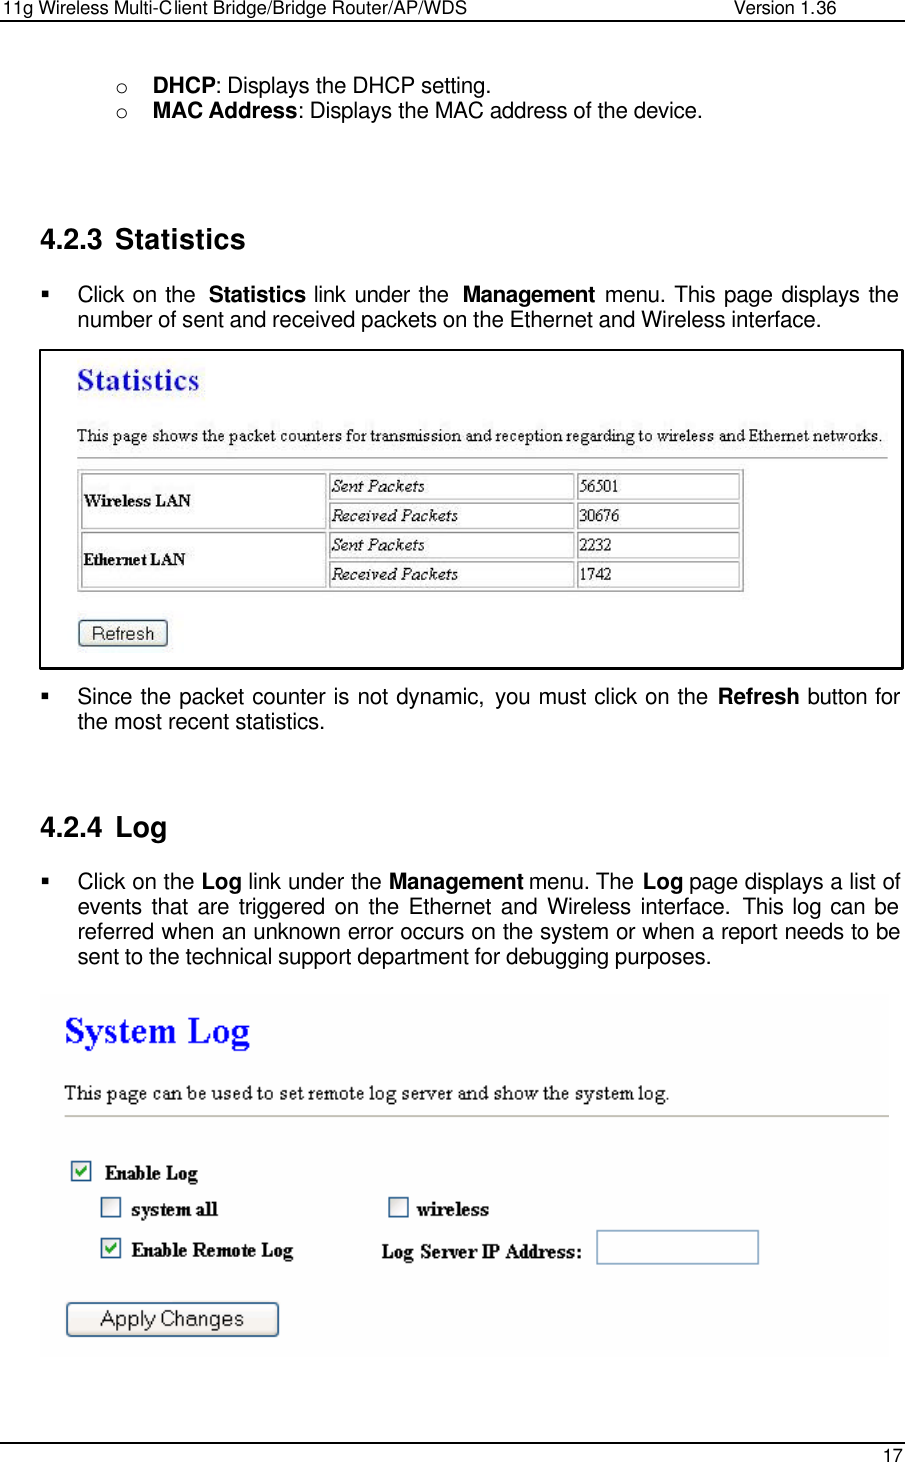 11g Wireless Multi-Client Bridge/Bridge Router/AP/WDS                                                   Version 1.36    17  o DHCP: Displays the DHCP setting.  o MAC Address: Displays the MAC address of the device.      4.2.3 Statistics § Click on the  Statistics link under the  Management menu. This page displays the number of sent and received packets on the Ethernet and Wireless interface.                § Since the packet counter is not dynamic, you must click on the Refresh button for the most recent statistics.     4.2.4 Log § Click on the Log link under the Management menu. The Log page displays a list of events that are triggered on the Ethernet and Wireless interface. This log can be referred when an unknown error occurs on the system or when a report needs to be sent to the technical support department for debugging purposes.       